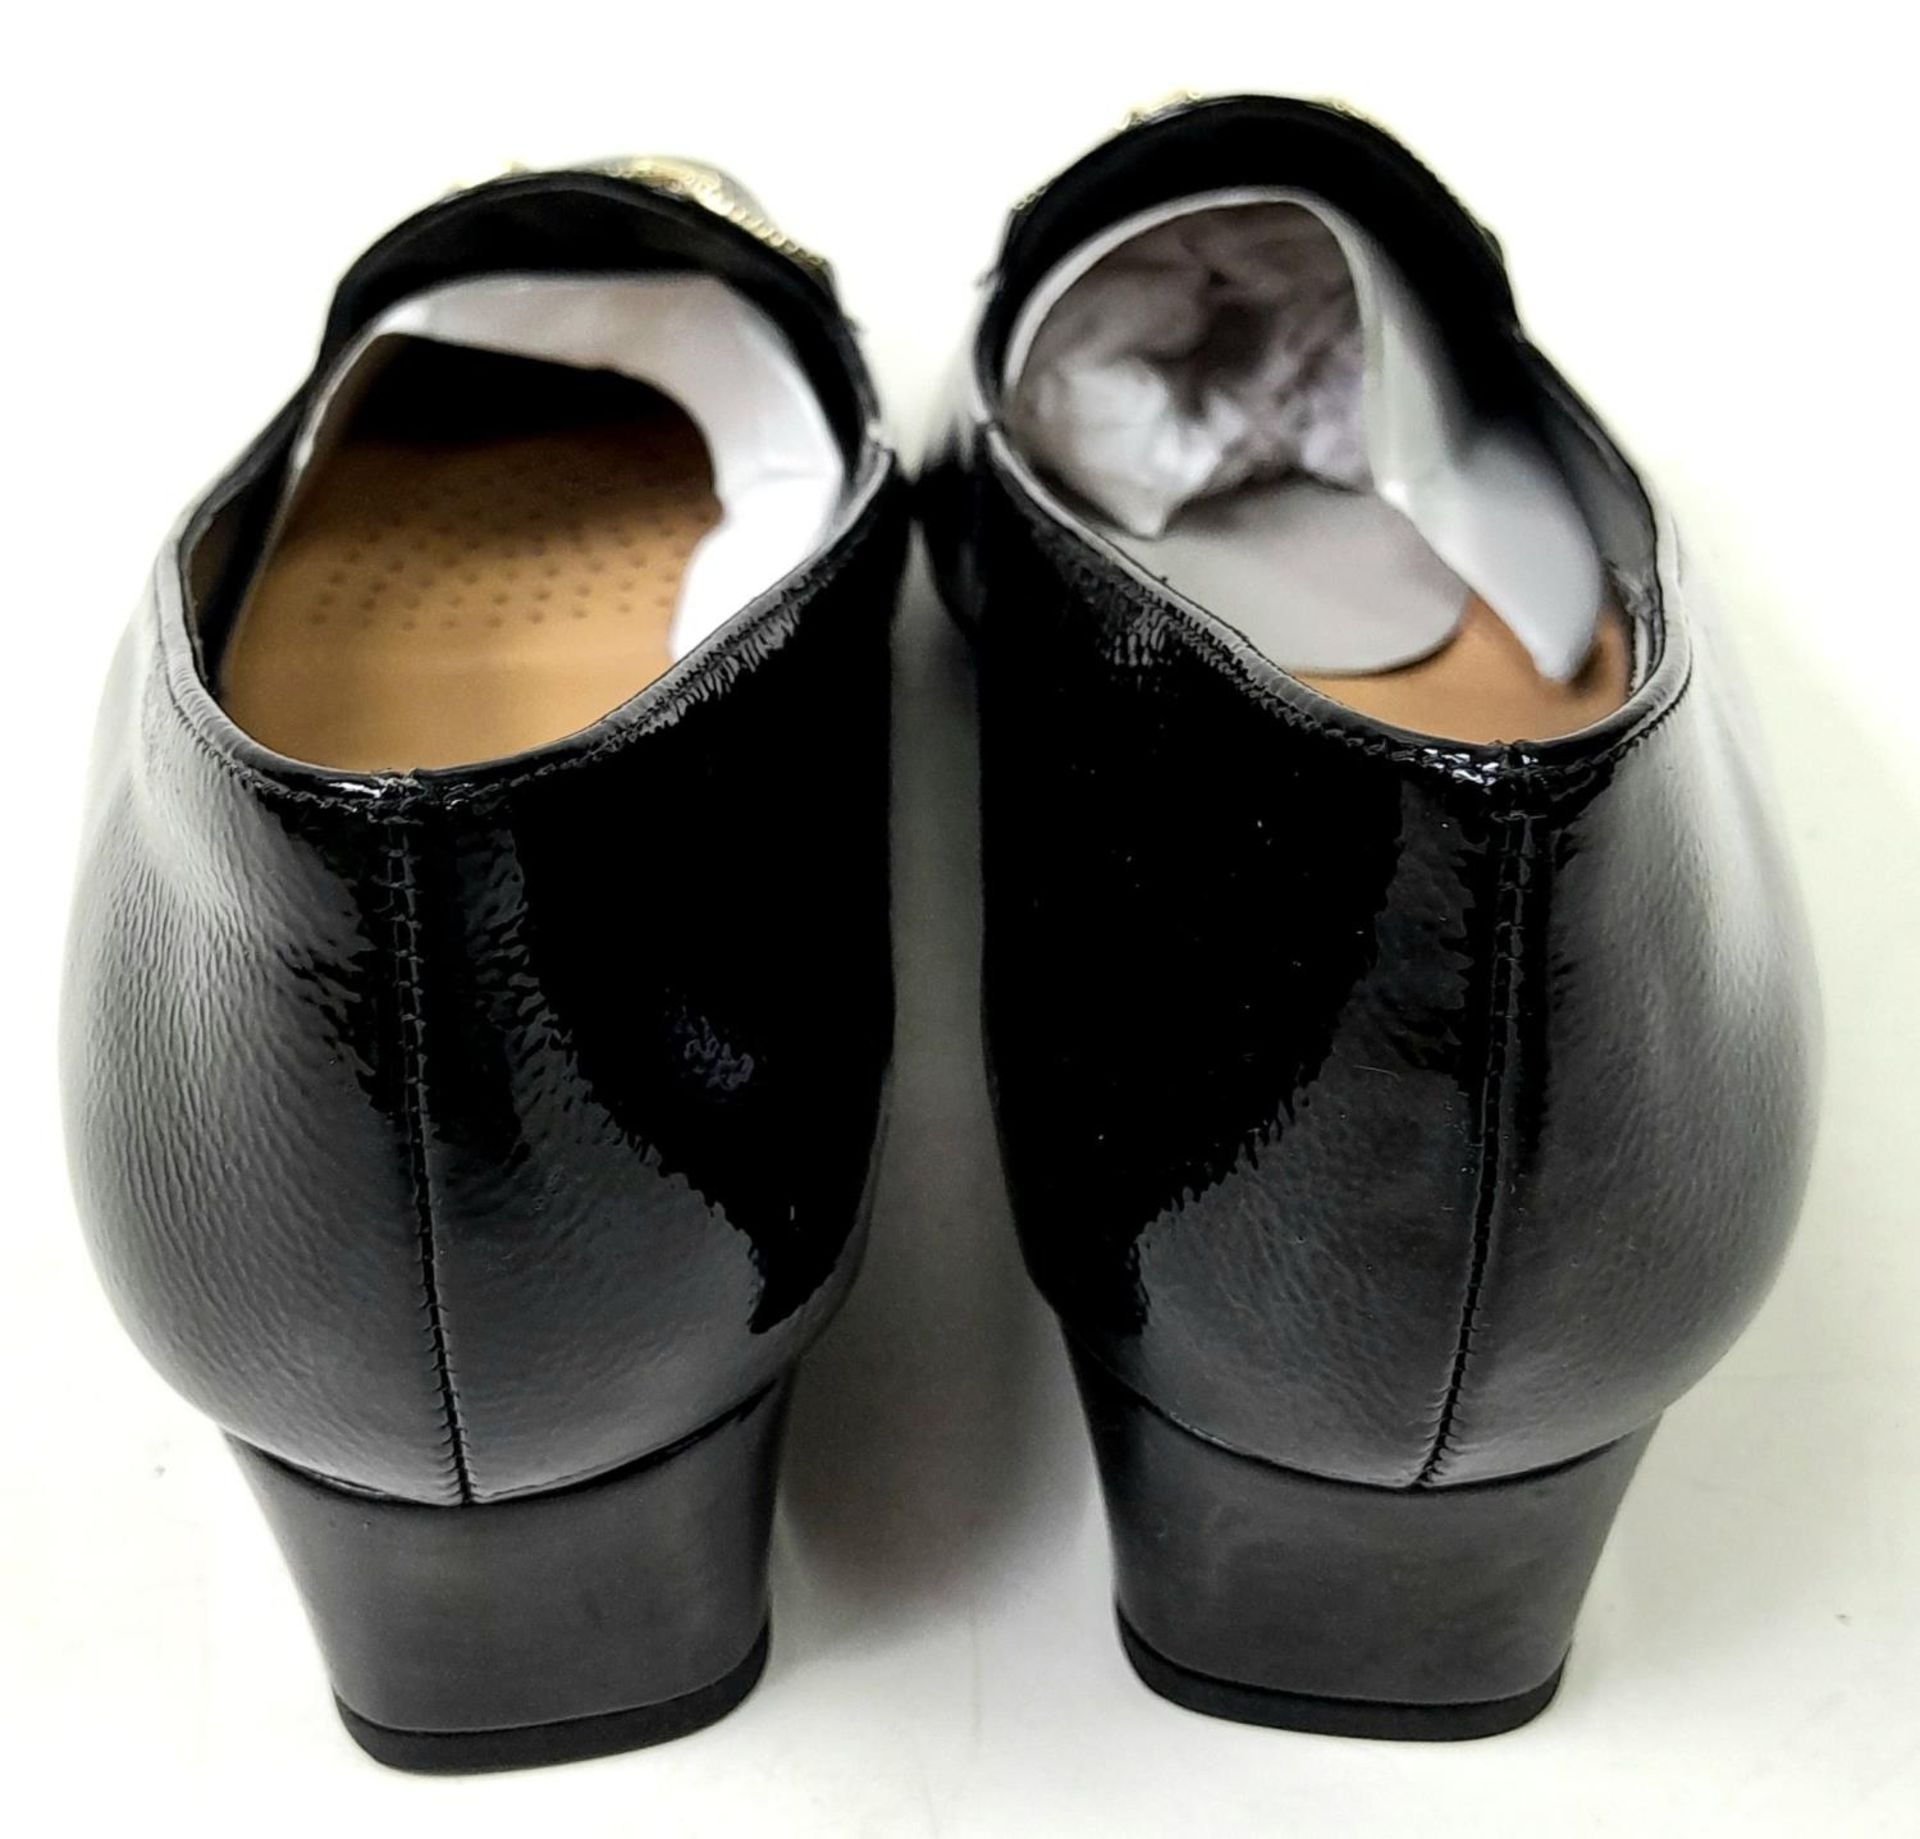 An Unused pair of "Twilight" lacquered ladies shoes by Van Dal, Size 5 ,1.5" heel. In box. - Image 5 of 10